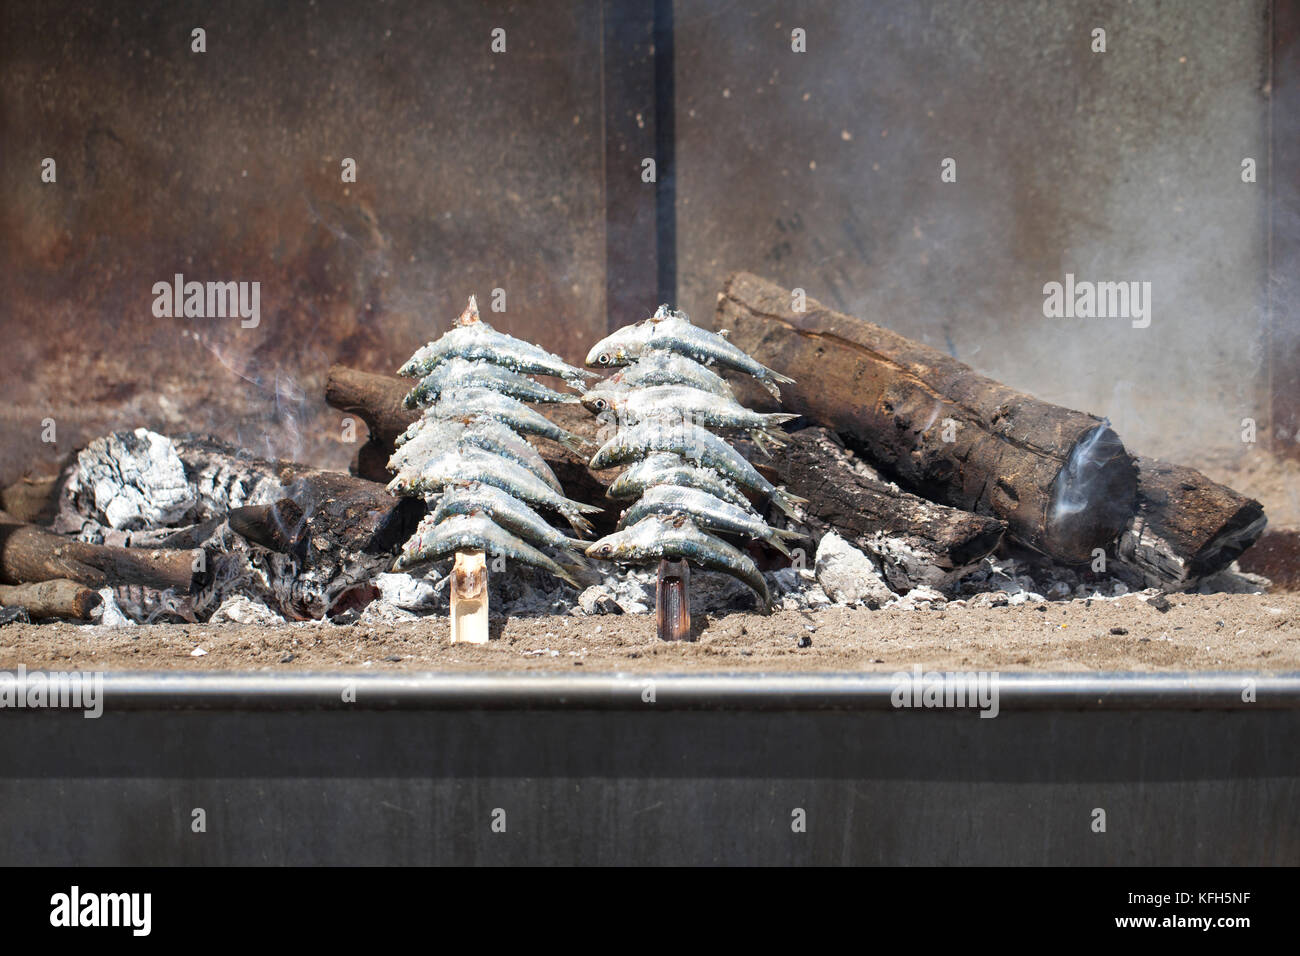 Espeto de Sardines (skewered sardines). This is a tradition in Malaga coast, sardines being slowly grilled over an open wood fire on the beach. Stock Photo